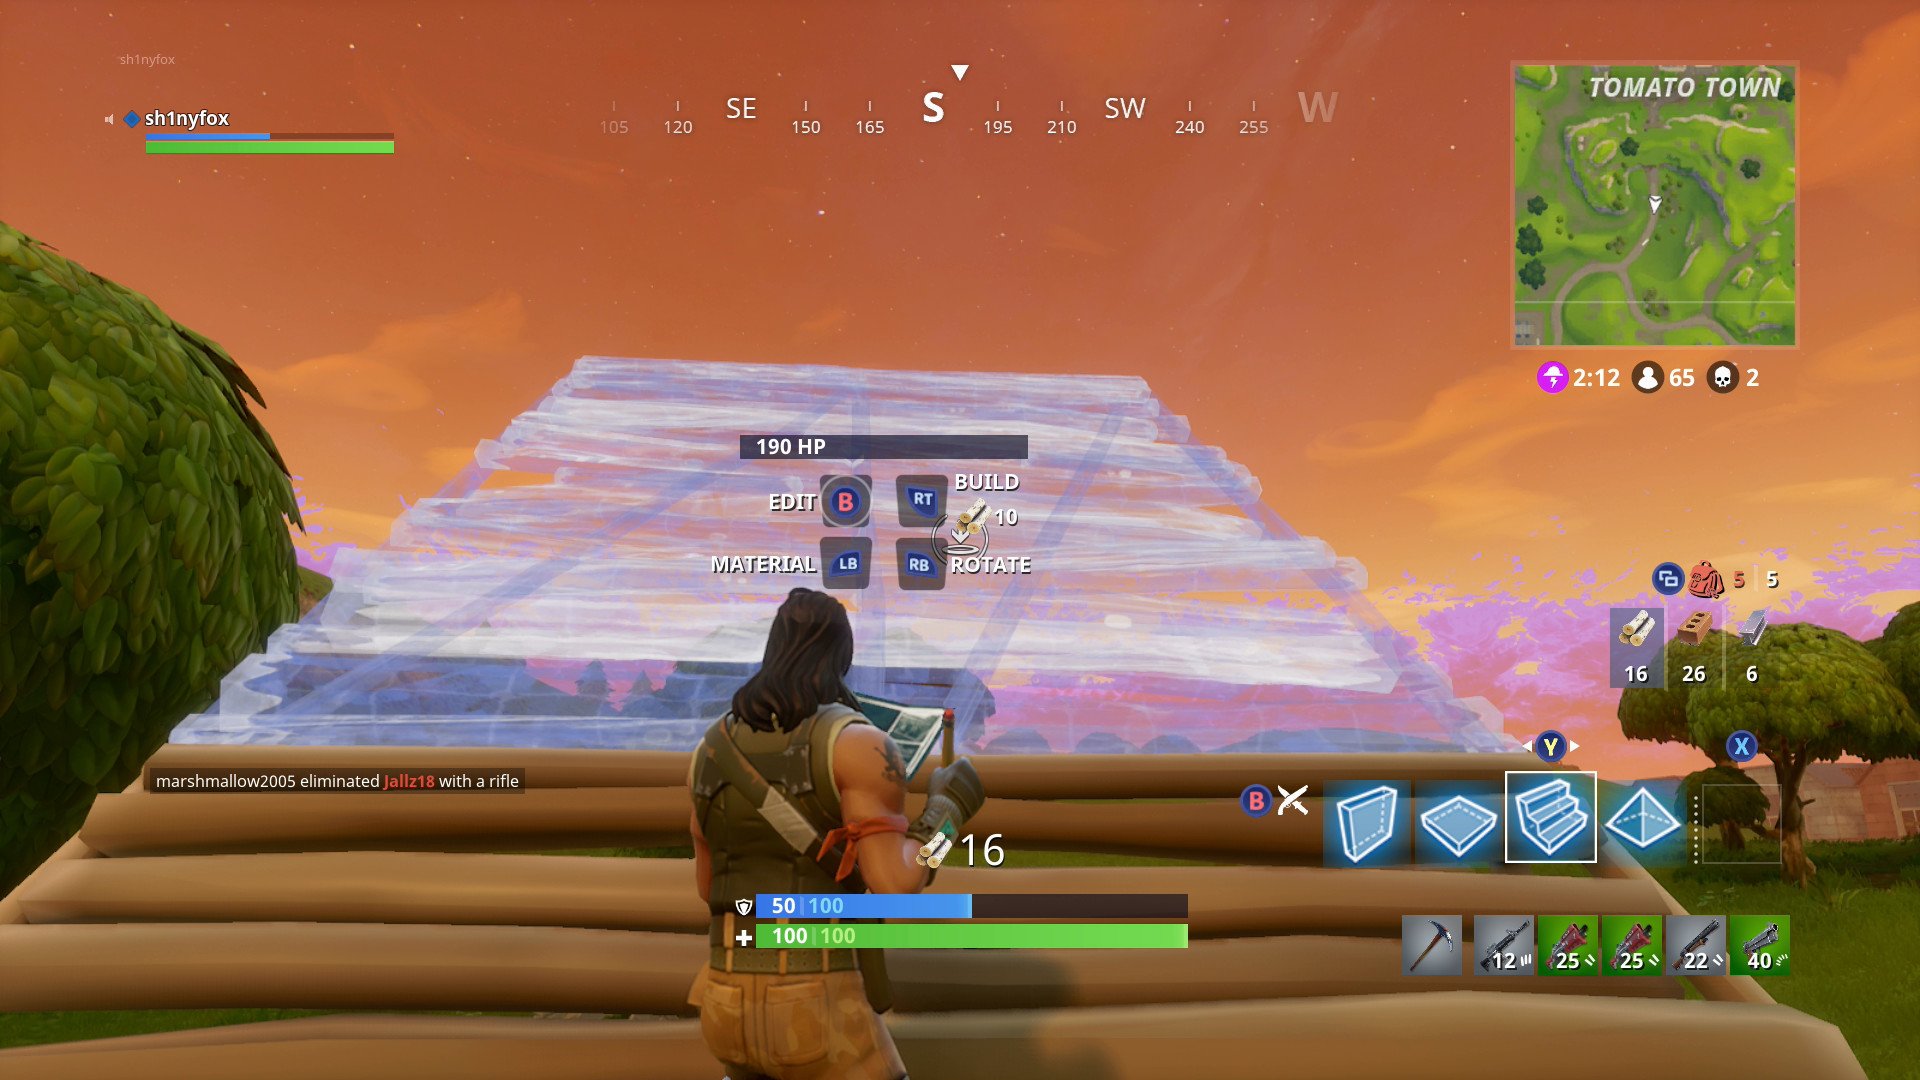 building aspects of the main fortnite game have made it into the battle royale mode this not only helps differentiate from the crowd but adds a new element - new building mode in fortnite